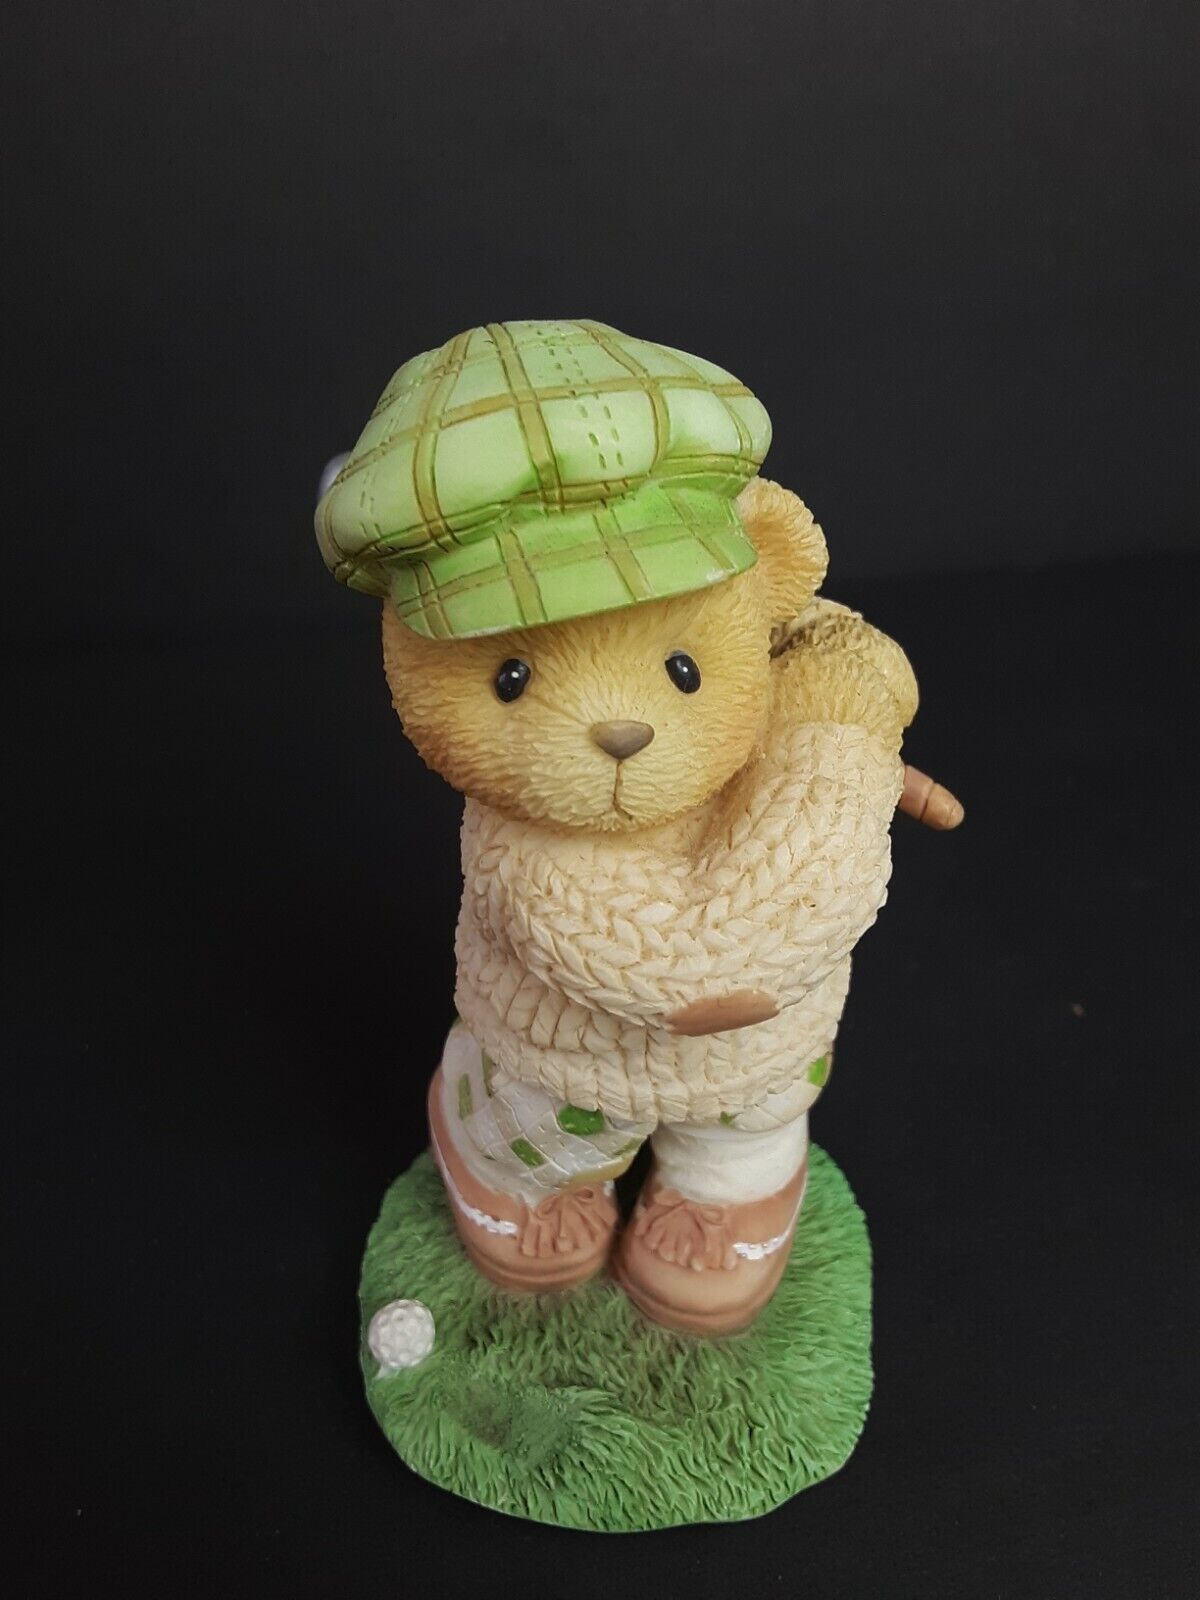 Cherished Teddies - Arnold - #476161 - You Putt Me In A Great Mood (B7)